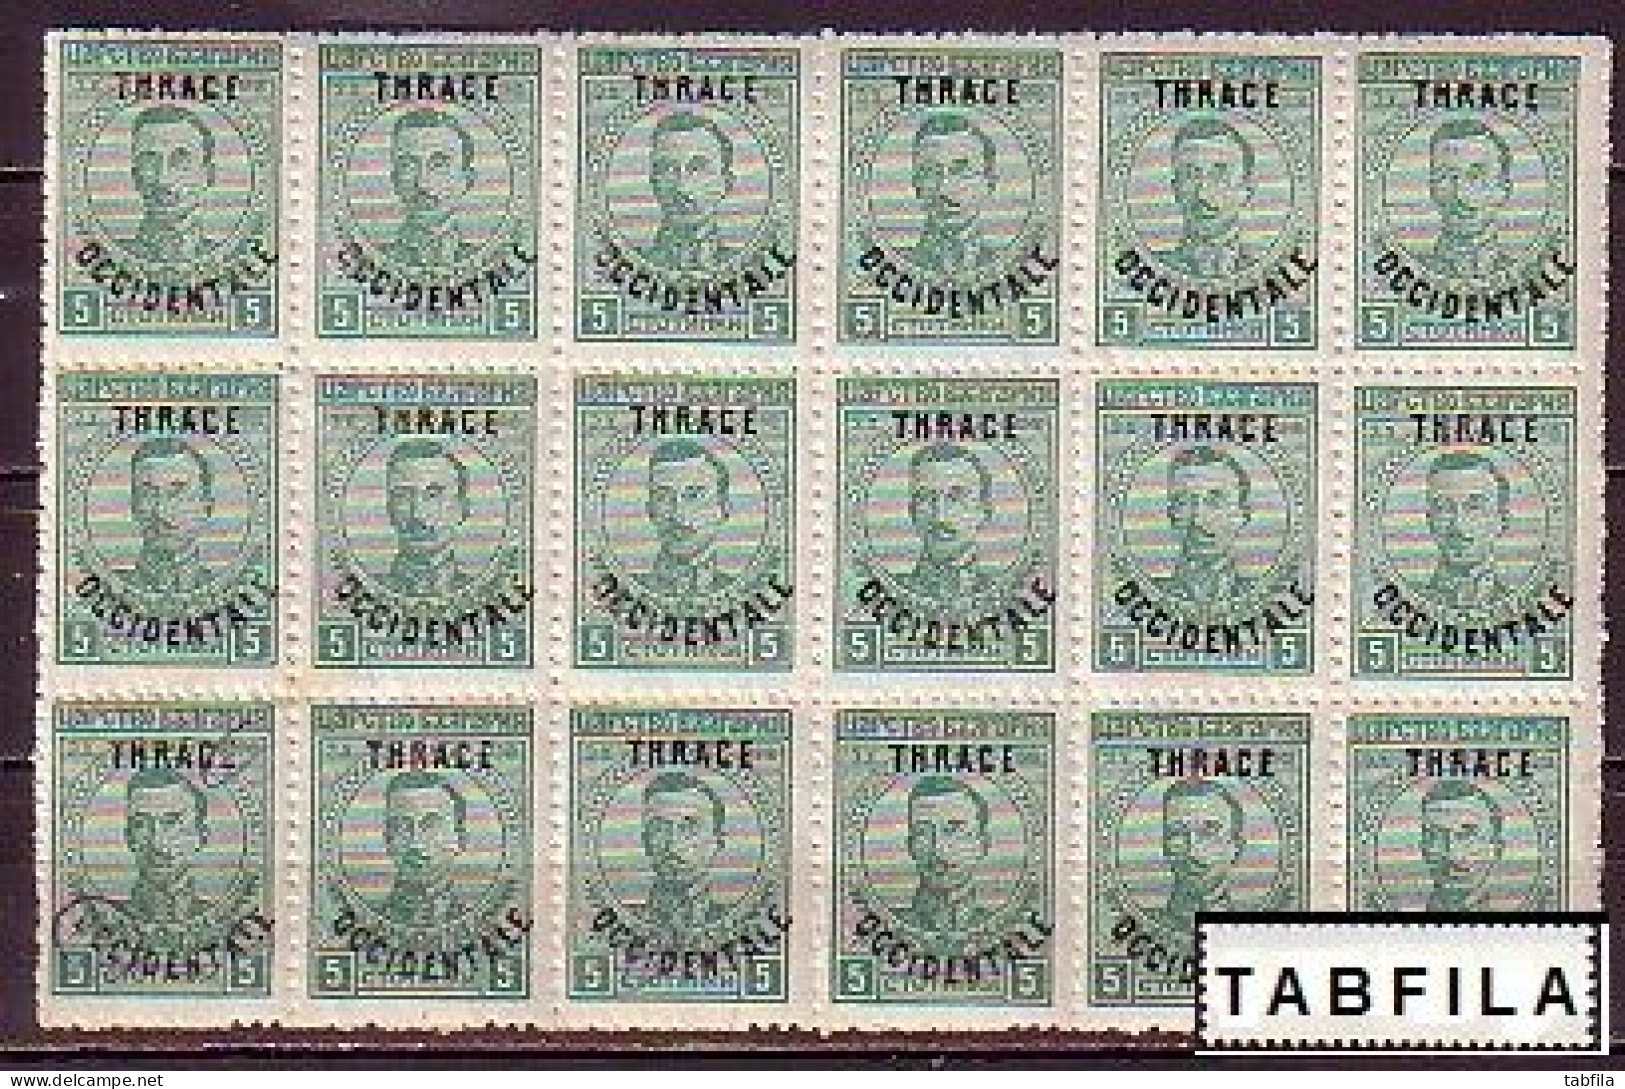 BULGARIA - 1920 - Tim.de 1919 Avec Surcharge "Thrace Occidentale" -  5st -  Mi No 20 MNH - Sheet Of 3 X 6 - Unused Stamps